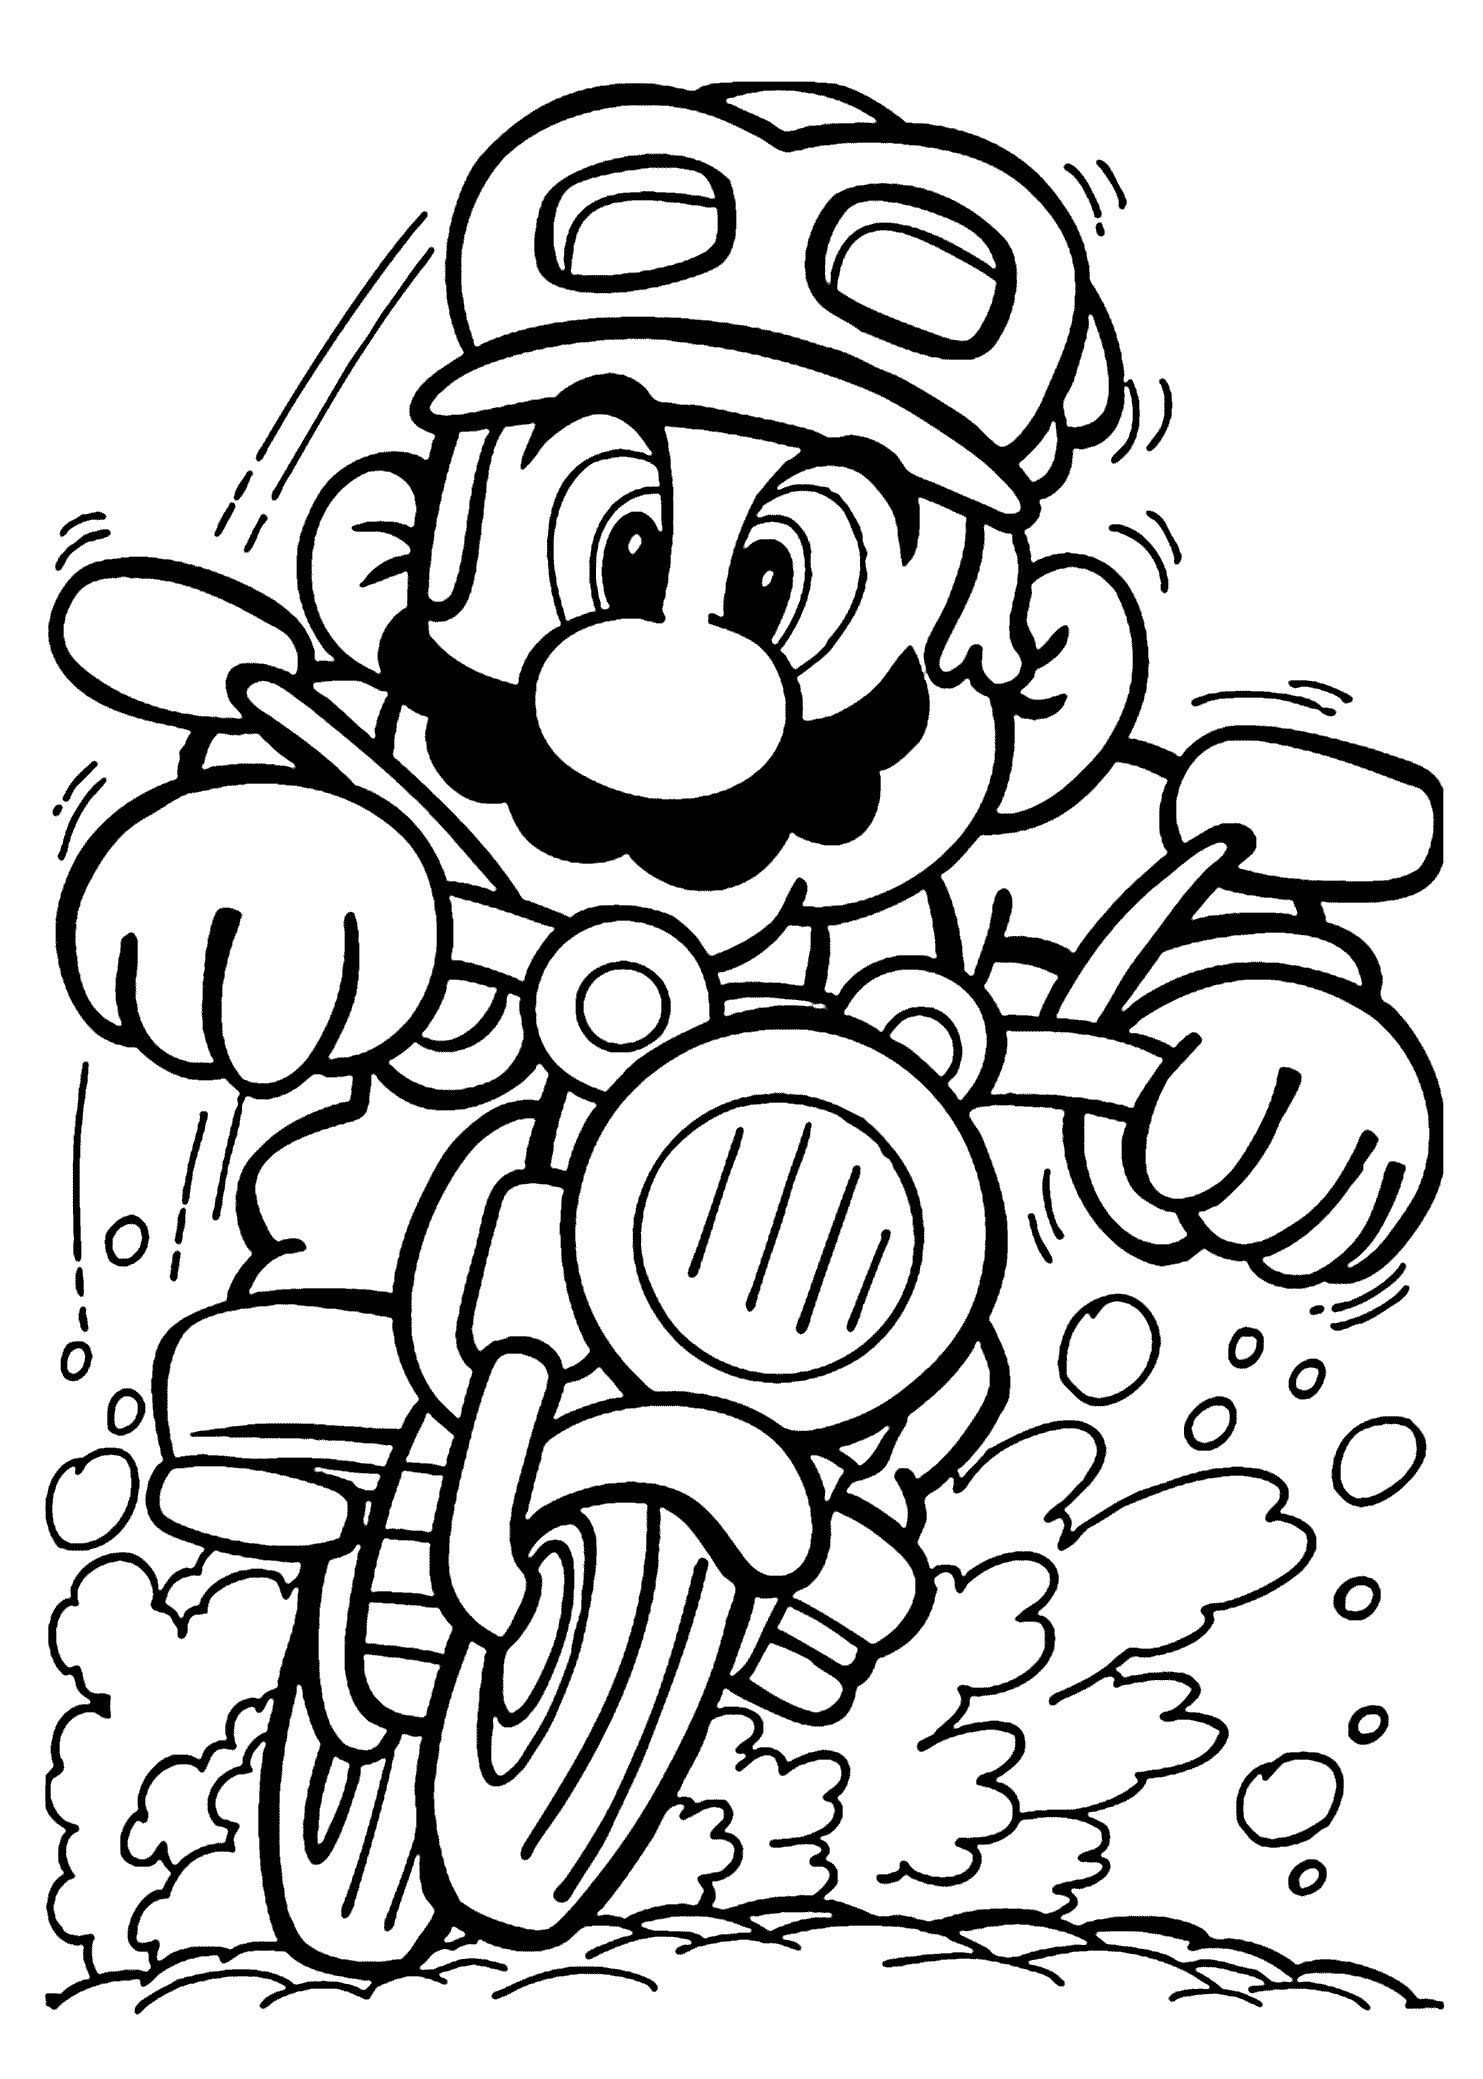 Adult Coloring Books For Boys
 Mario on motorcycle coloring pages for kids printable